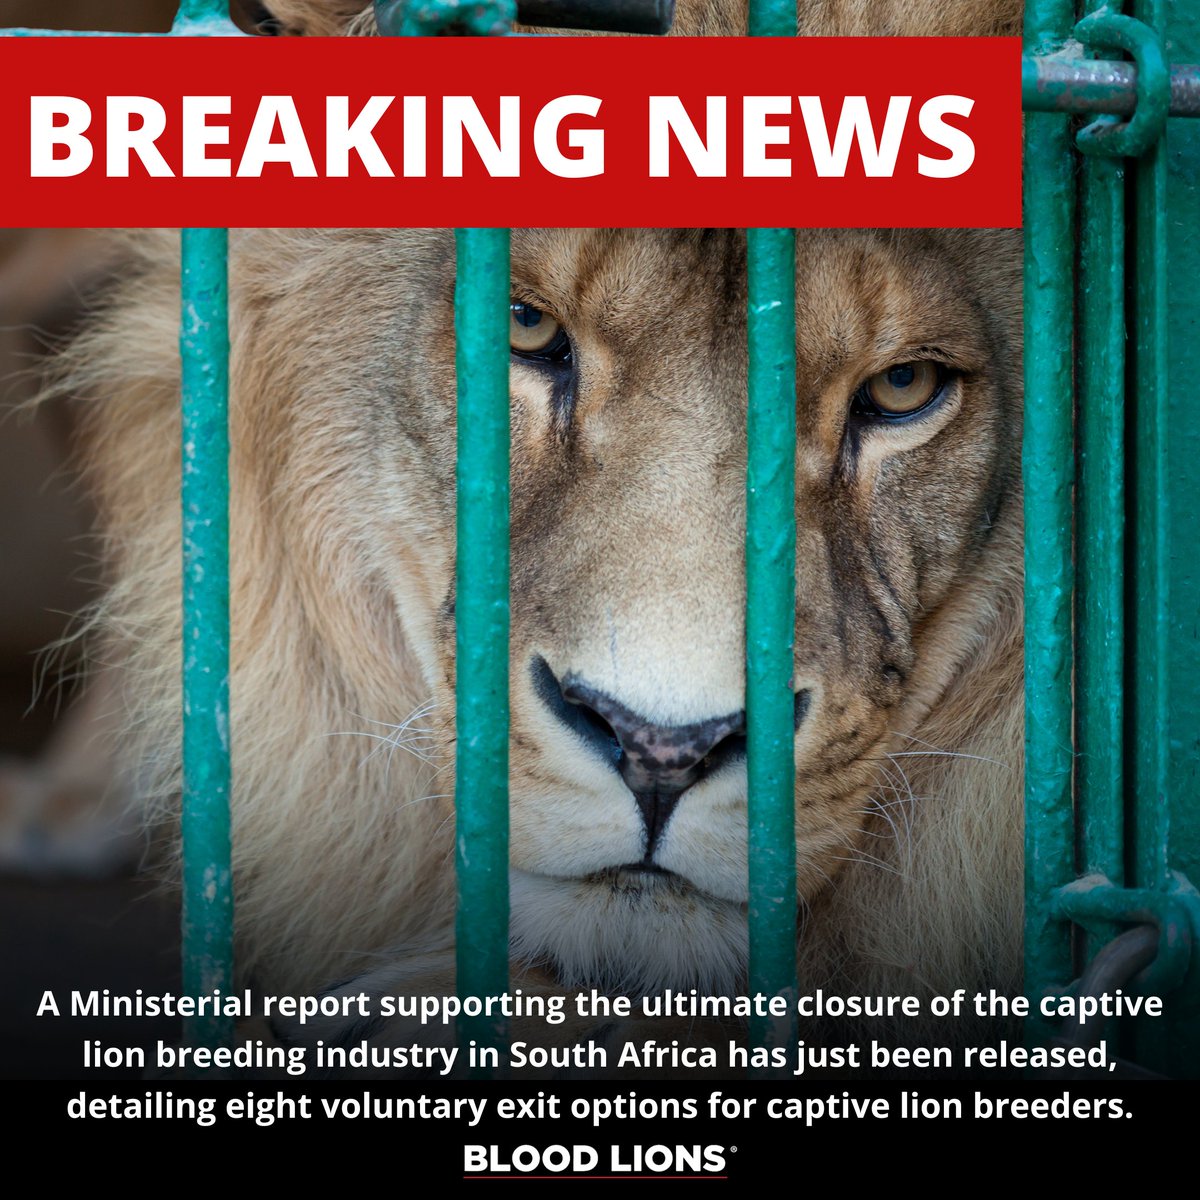 BREAKING: A new Ministerial report supporting the closure of the captive lion breeding industry in South Africa has just been released, detailing 8 voluntary exit options for captive lion breeders, which includes two mandatory prerequisites. Full report: dffe.gov.za/sites/default/…